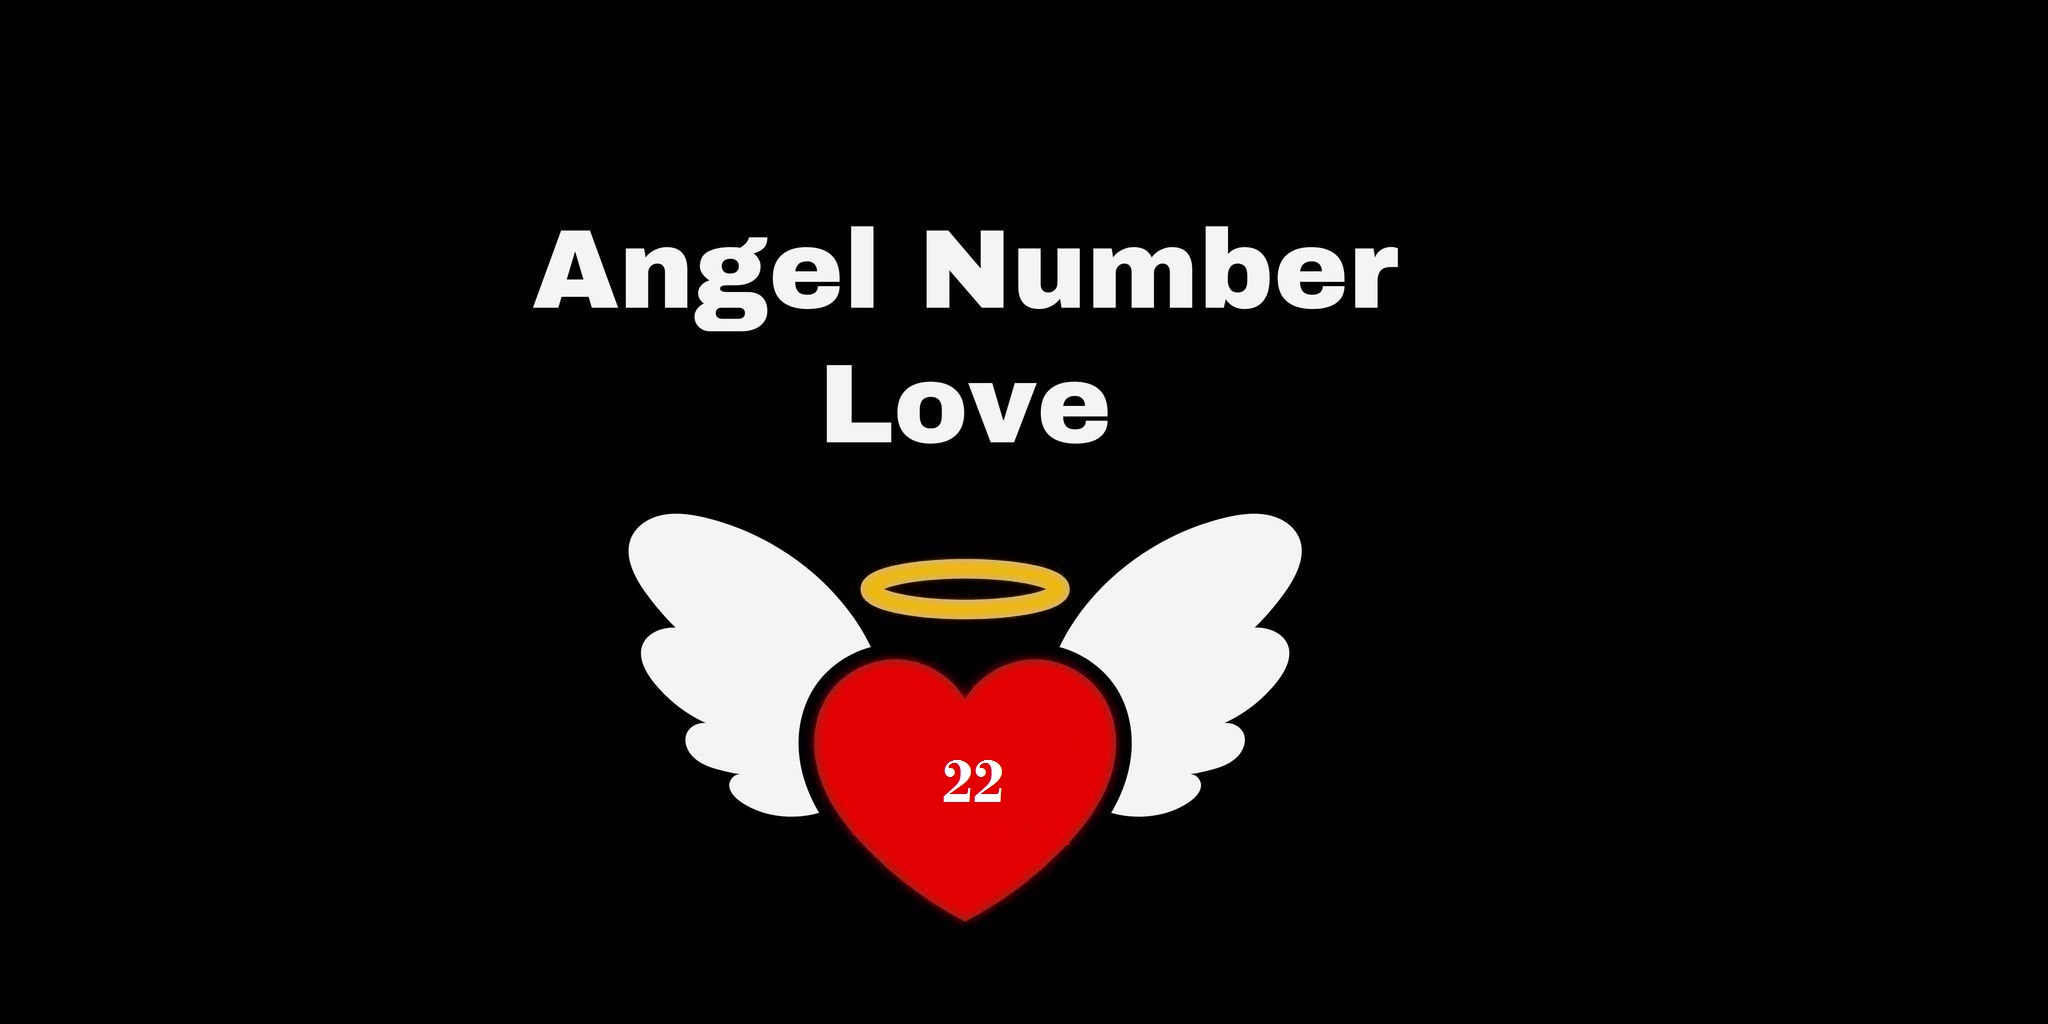 22 Angel Number Meaning In Love